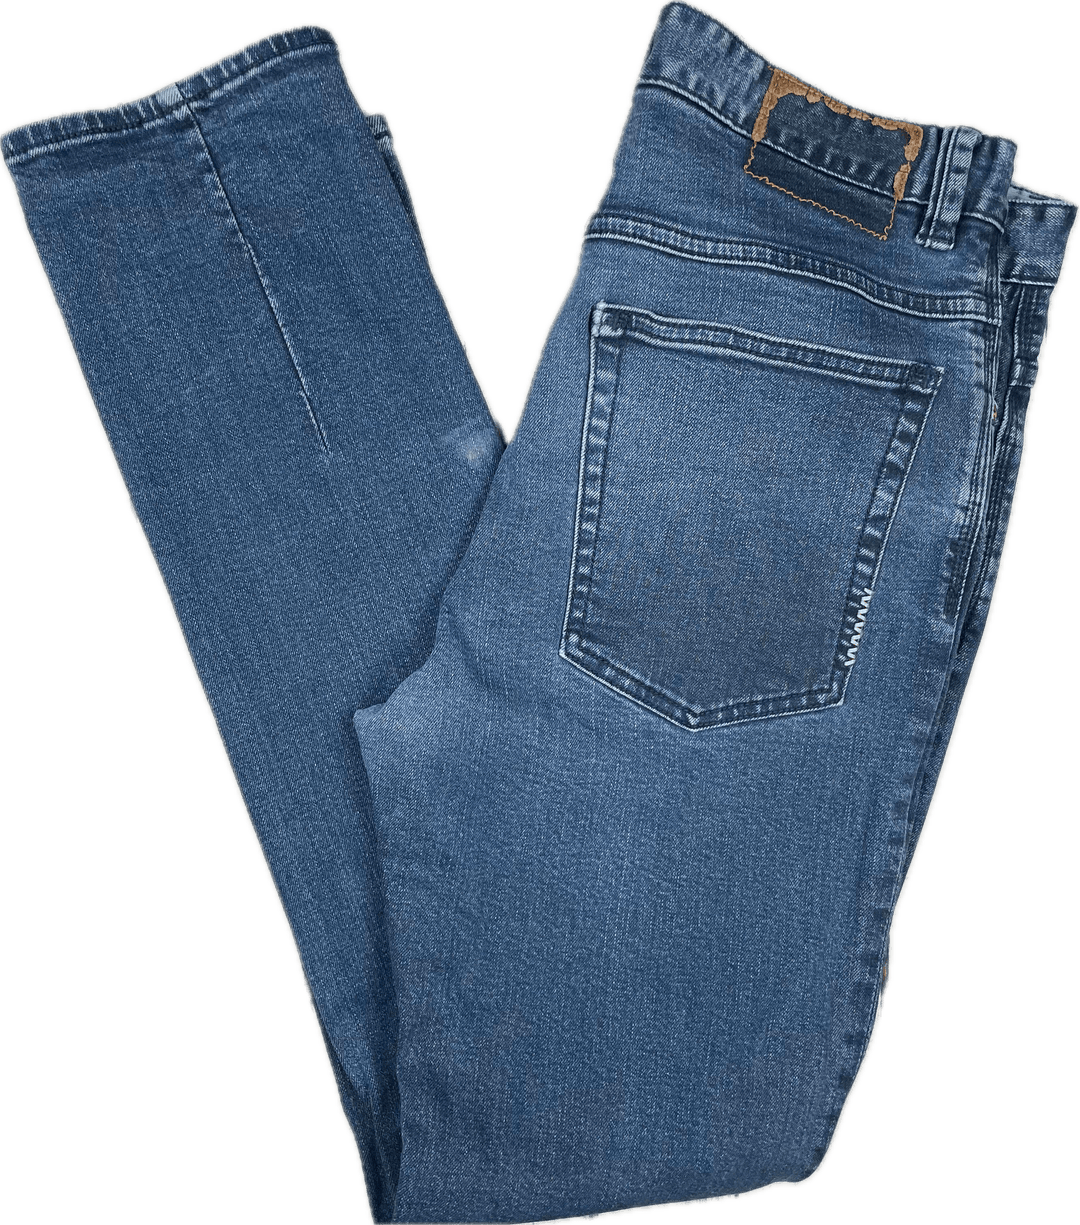 NEUW Mens 'Ray Tapered' Stretch Jeans - Size 32 - Jean Pool